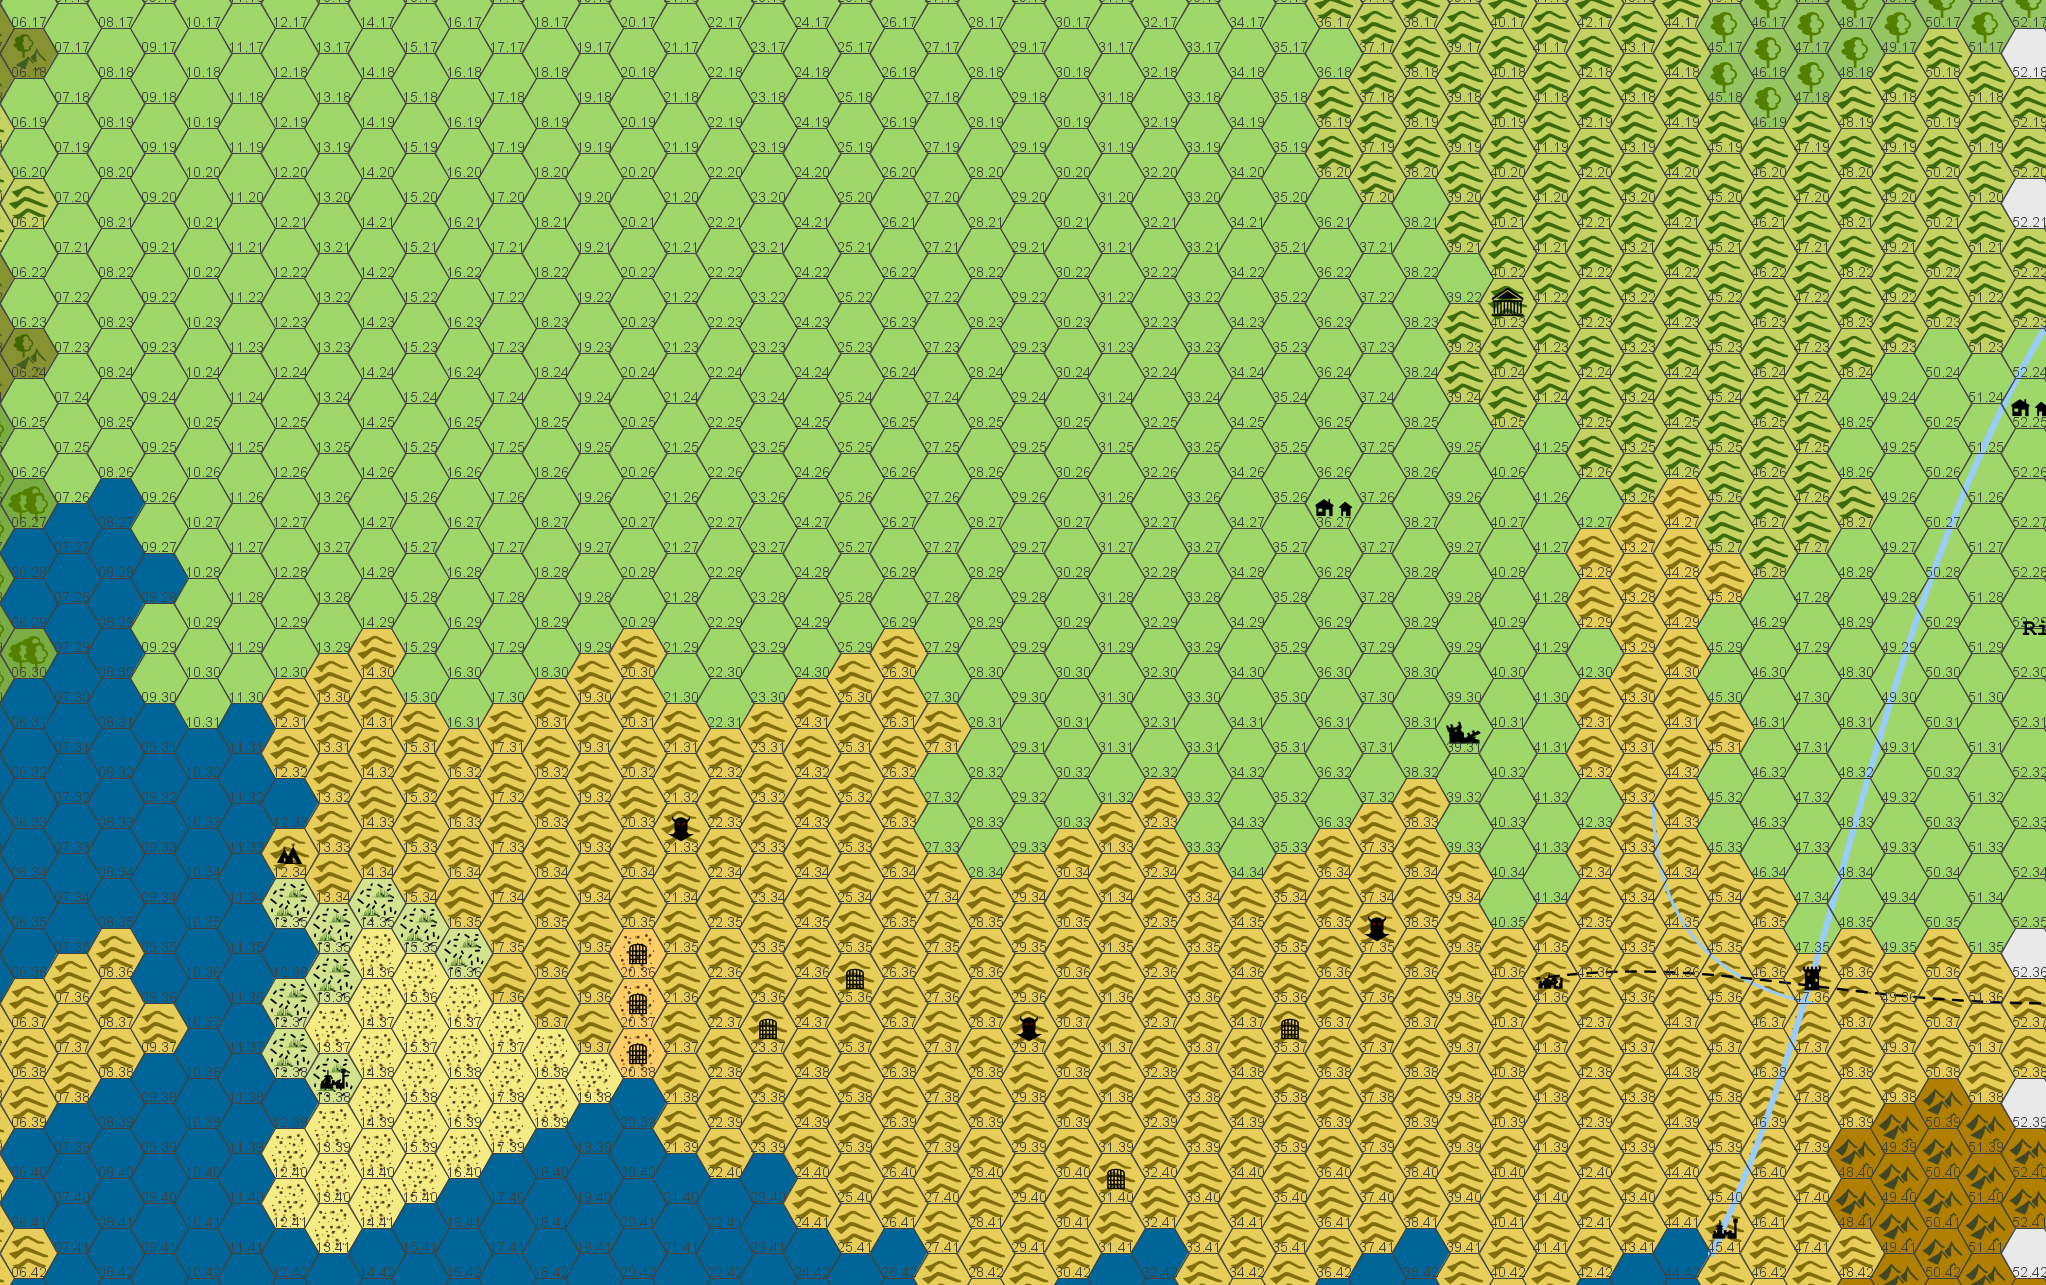 Player's Map West 9.8.16.png